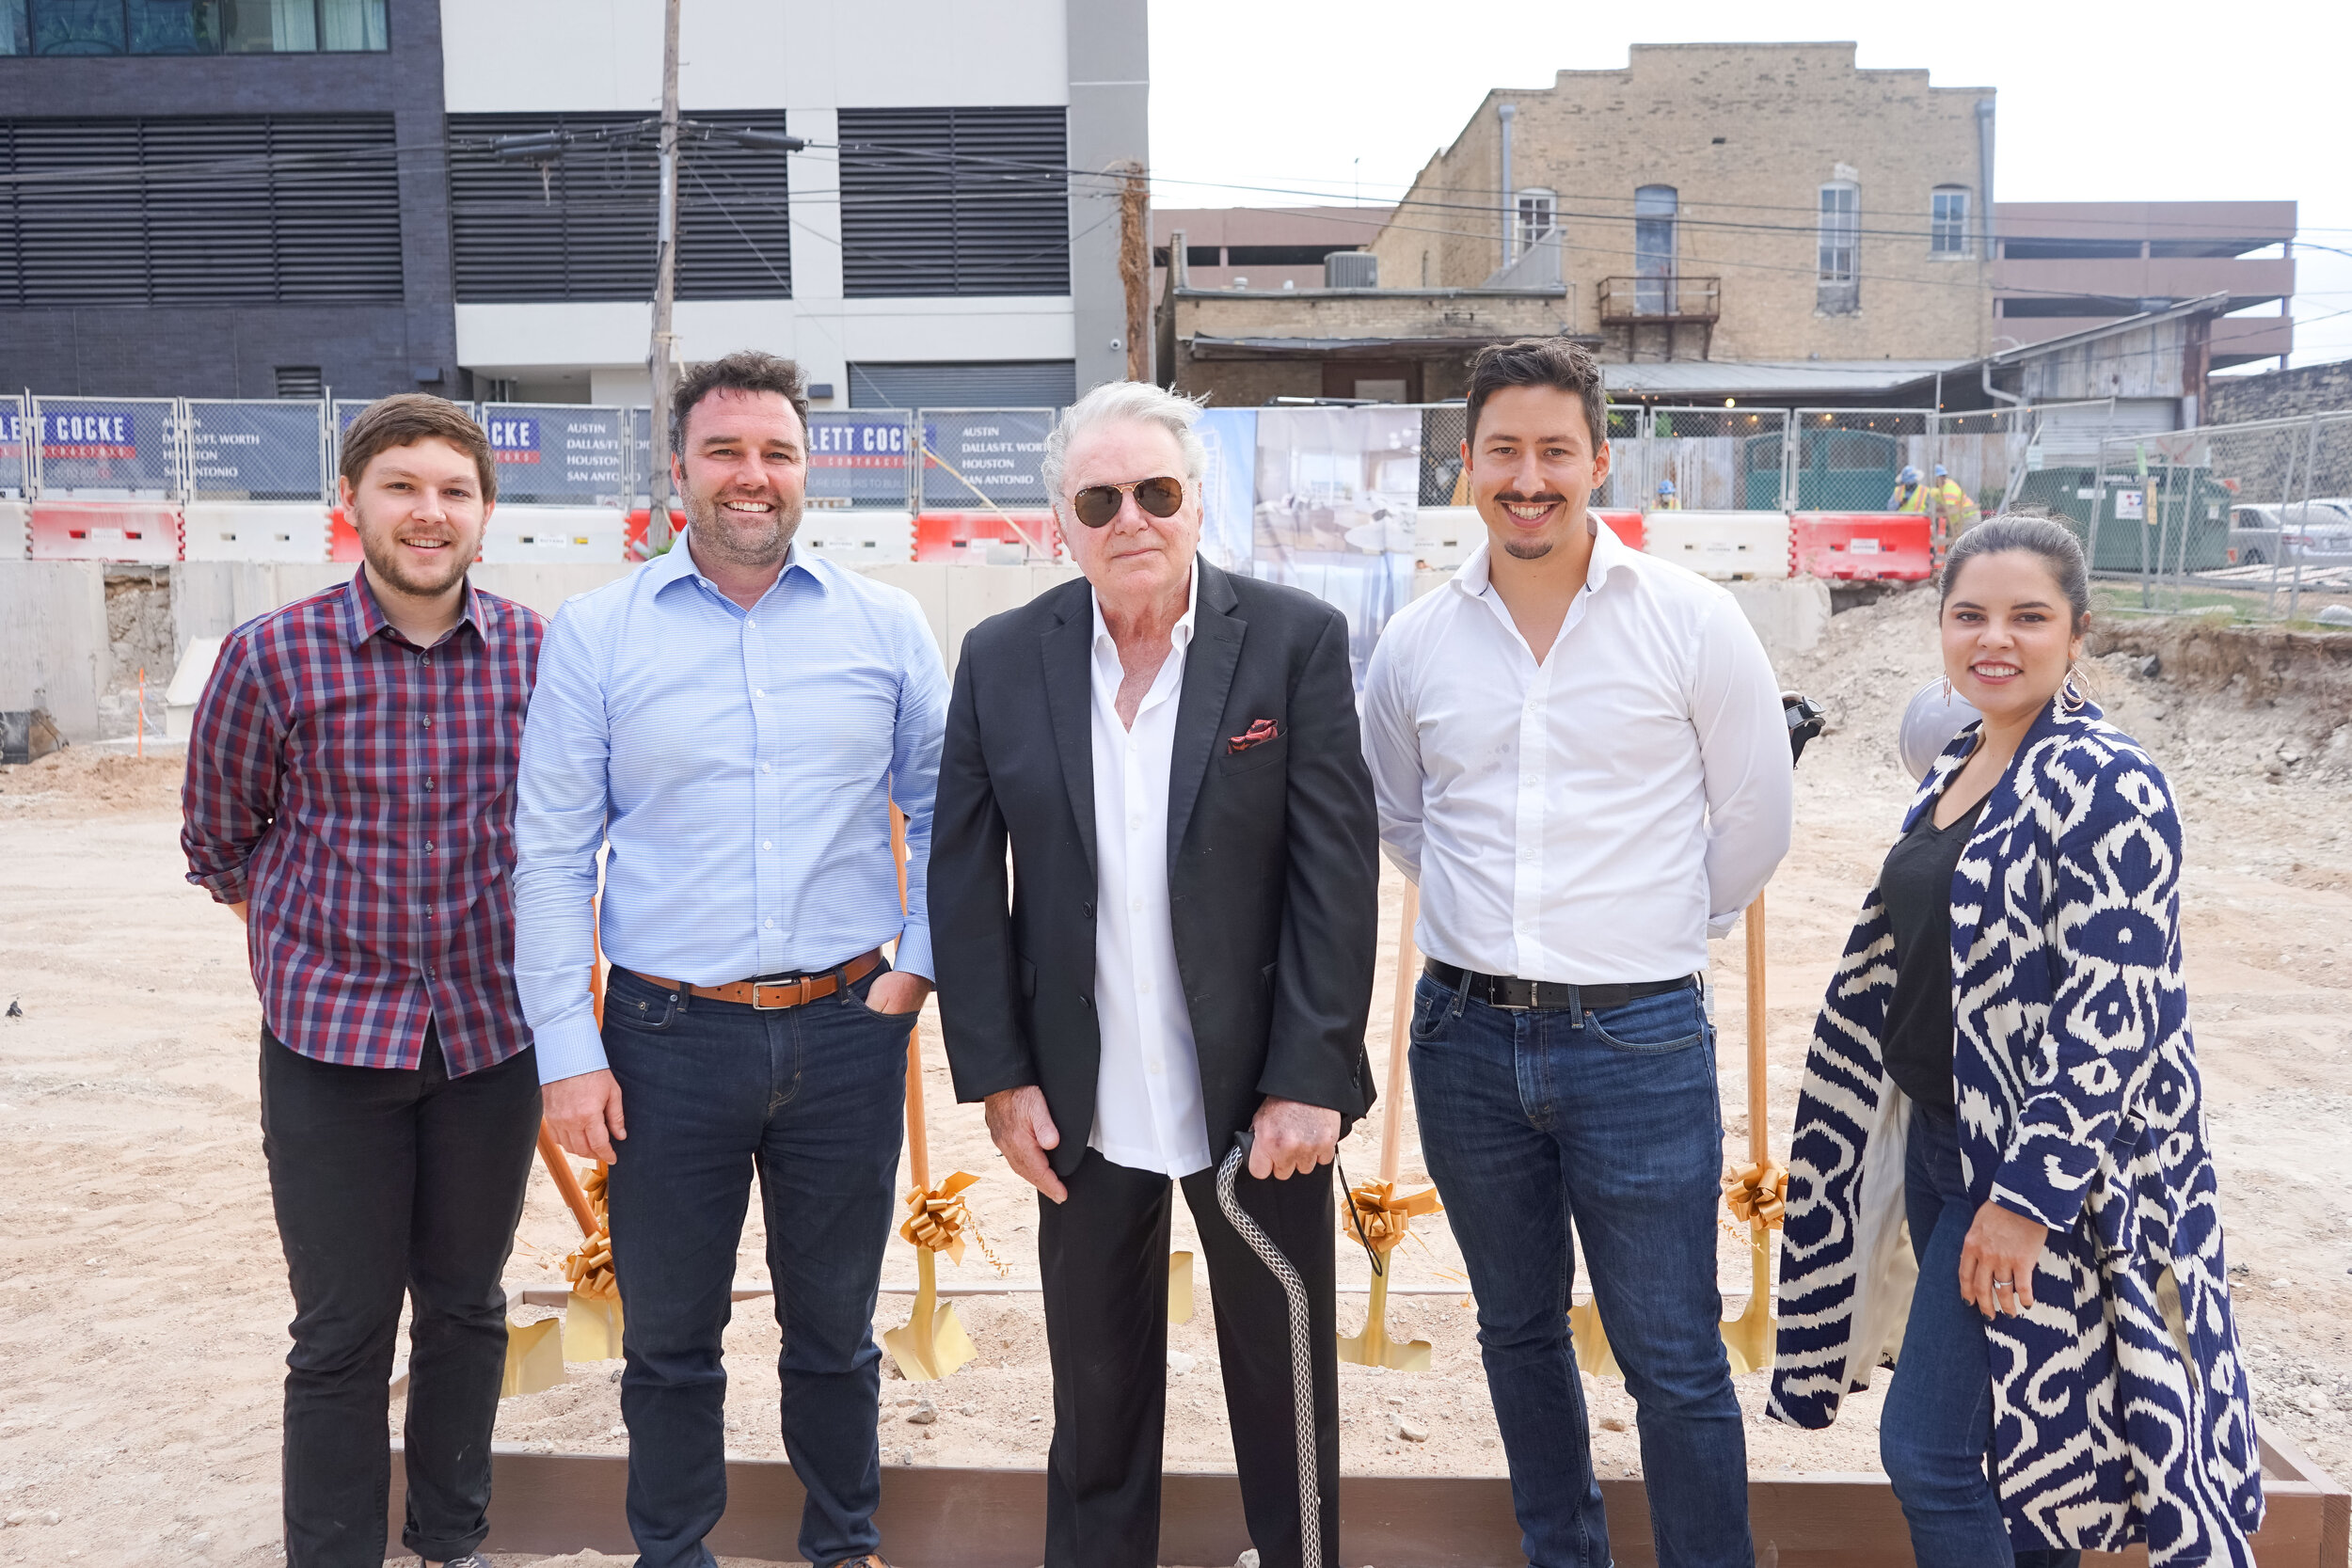   Pictured left to right: Drew Andries (Rhode Partners), Robert Tait (Rhode Partners), John Armenia (Armenia Group), Wes Haynie (Rhode Partners), and Laura Nering (Rhode Partners).  